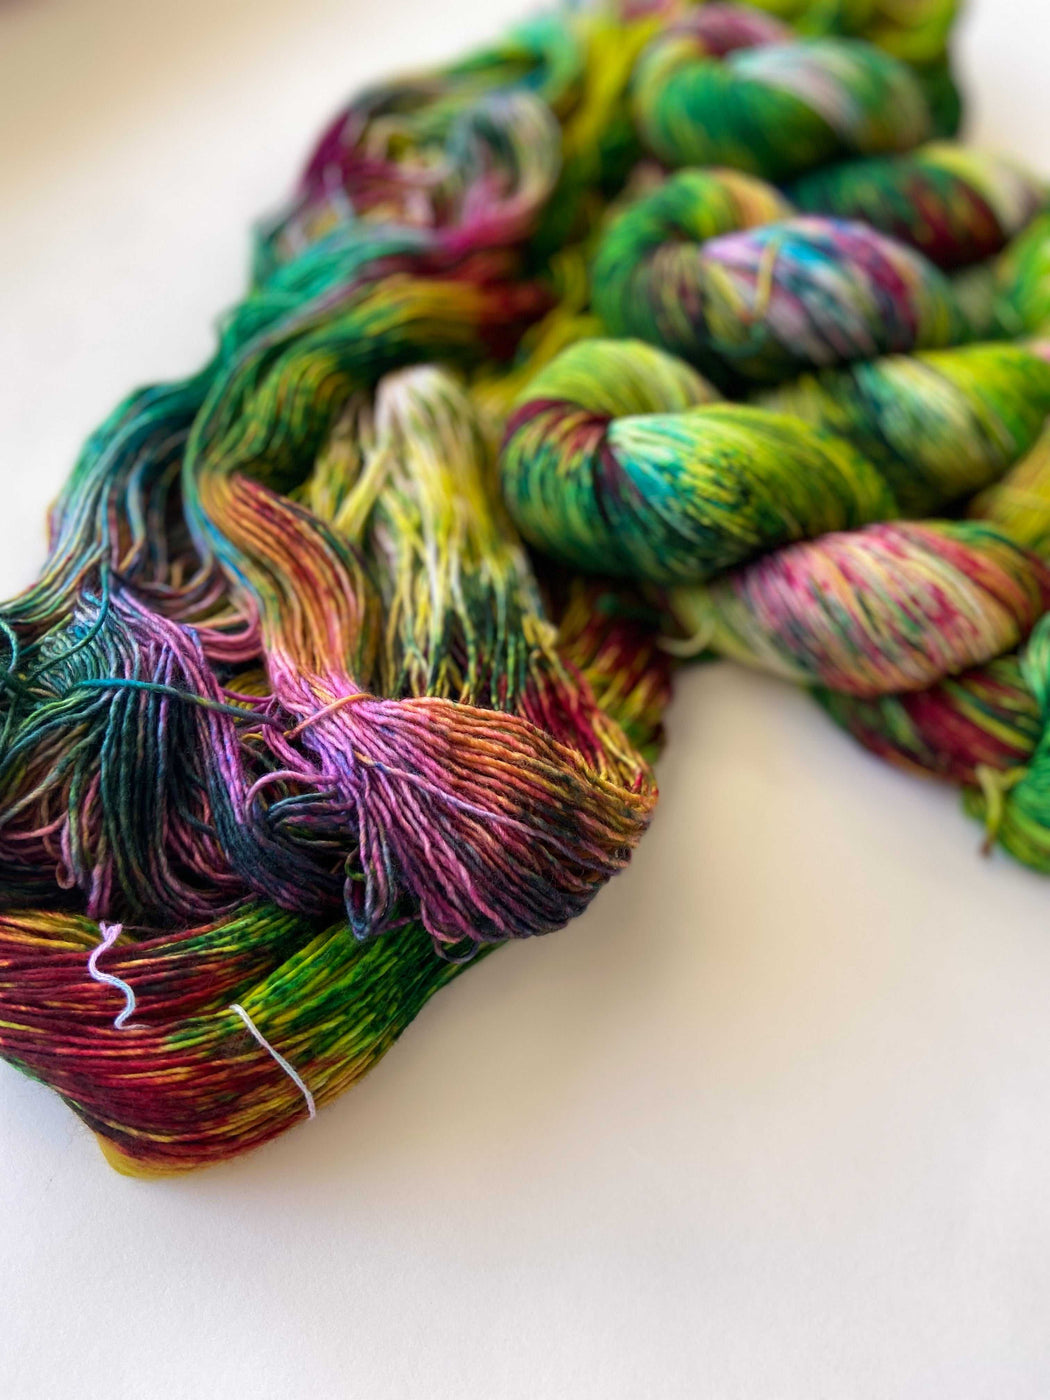 Unbreakable Vow - Ruby and Roses Yarn - Hand Dyed Yarn